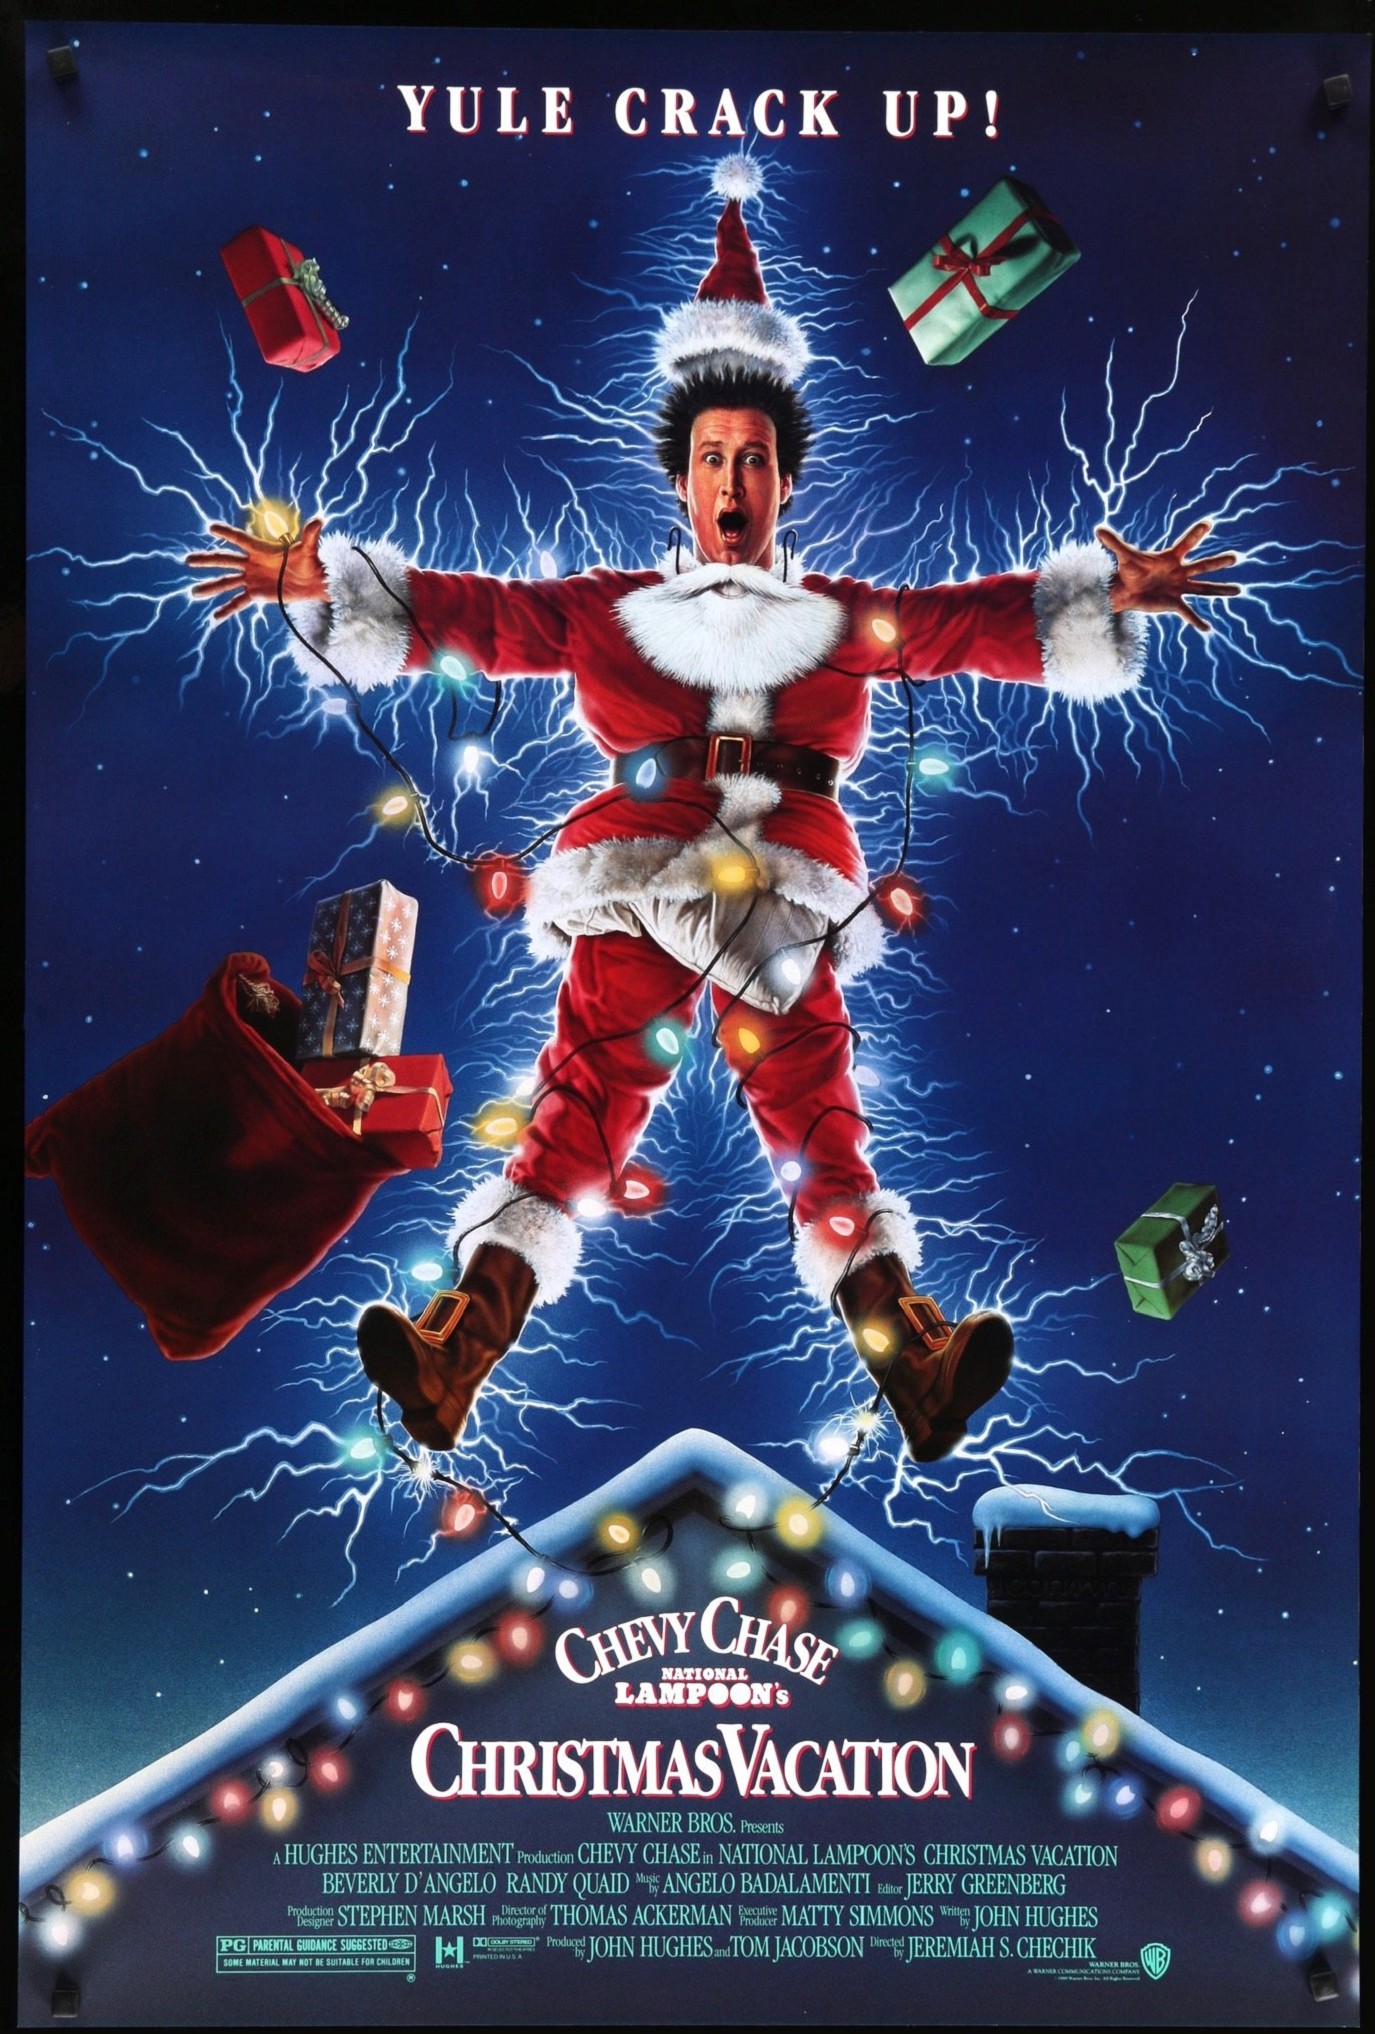 NATIONAL LAMPOON'S CHRISTMAS VACATION